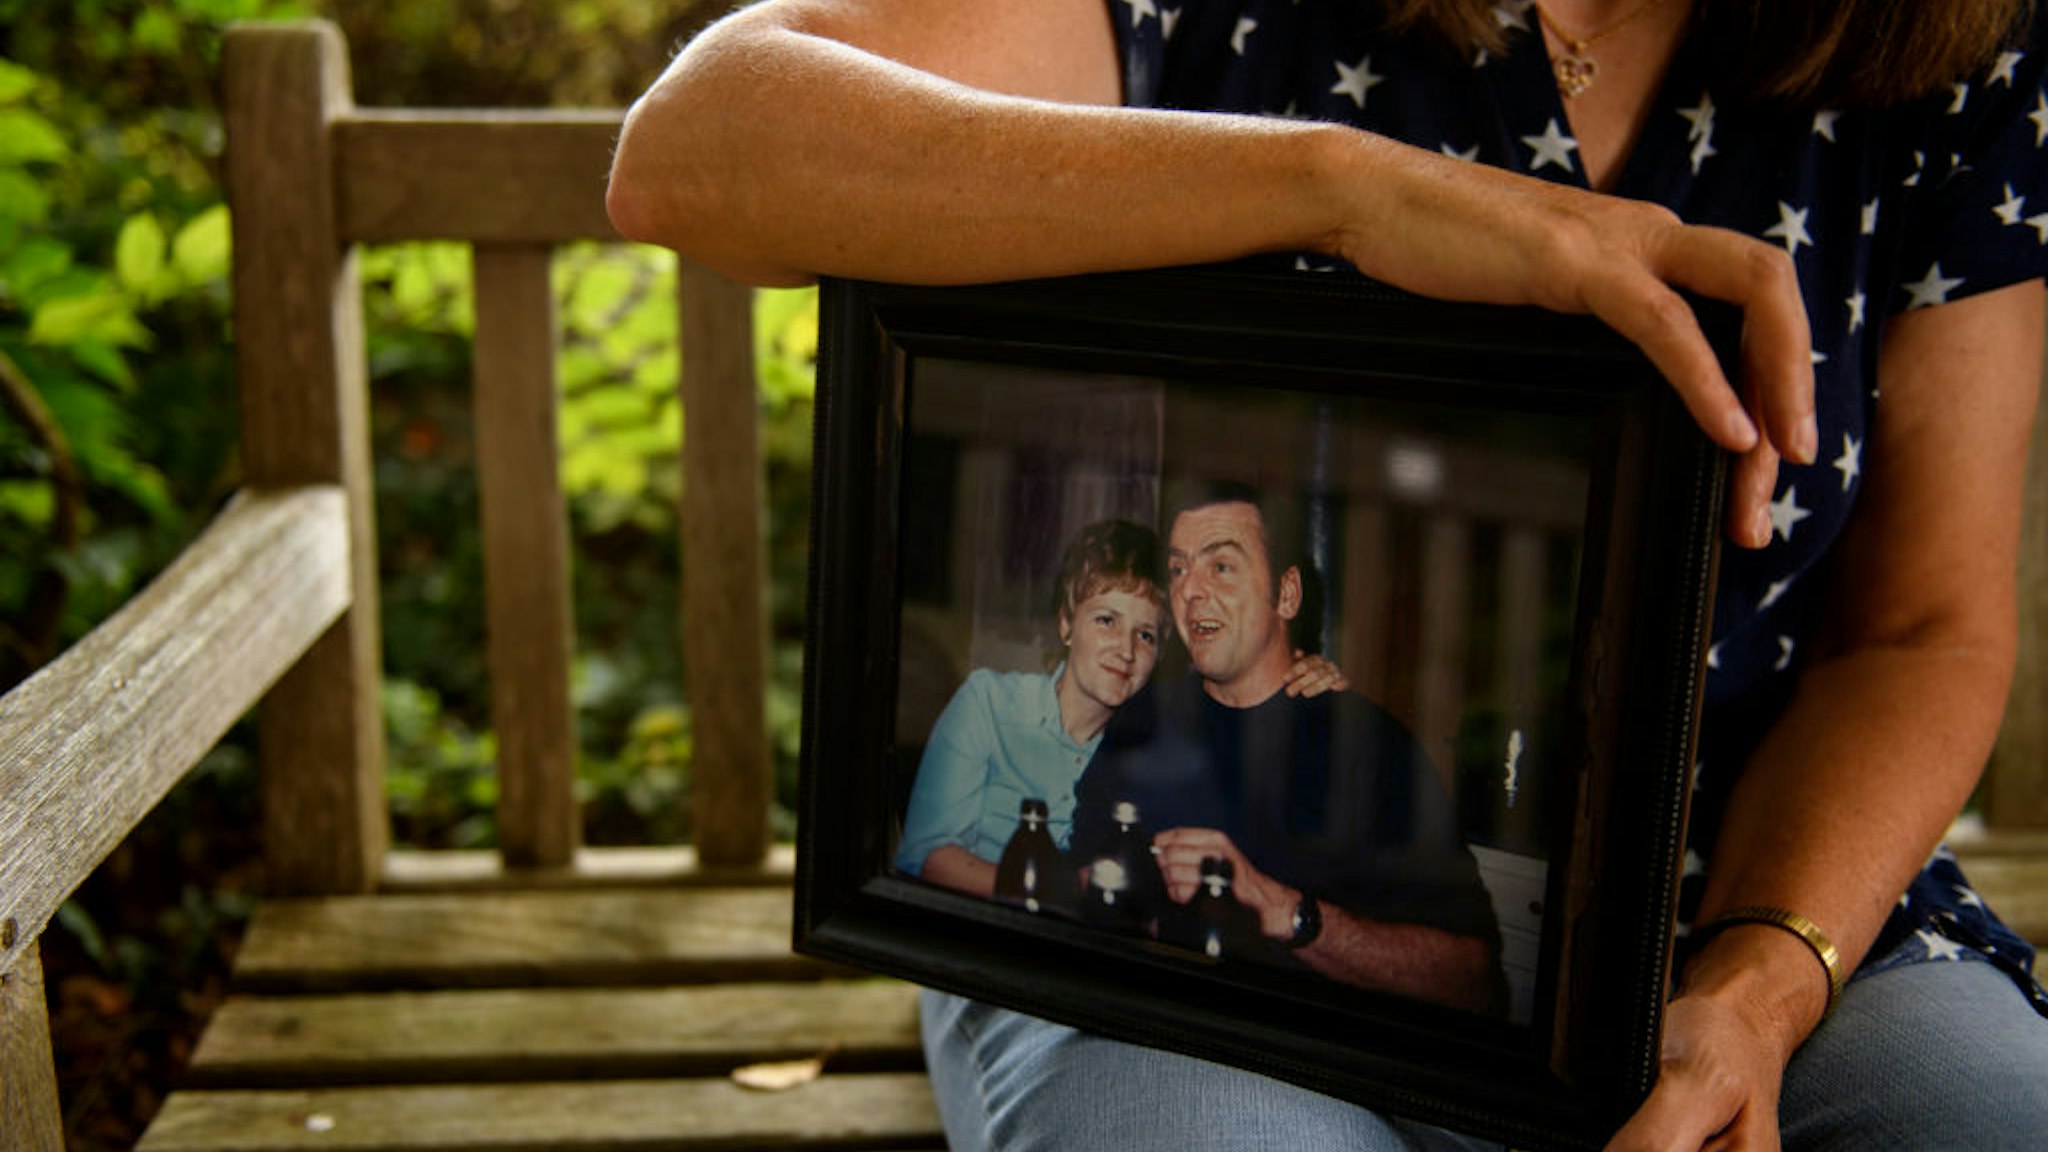 Melanie Proctor with a photo of her mother and father, Army veteran Felix Kirk McDermott, outside the VA Hospital in Clarksburg, West Virginia on September 13, 2019.